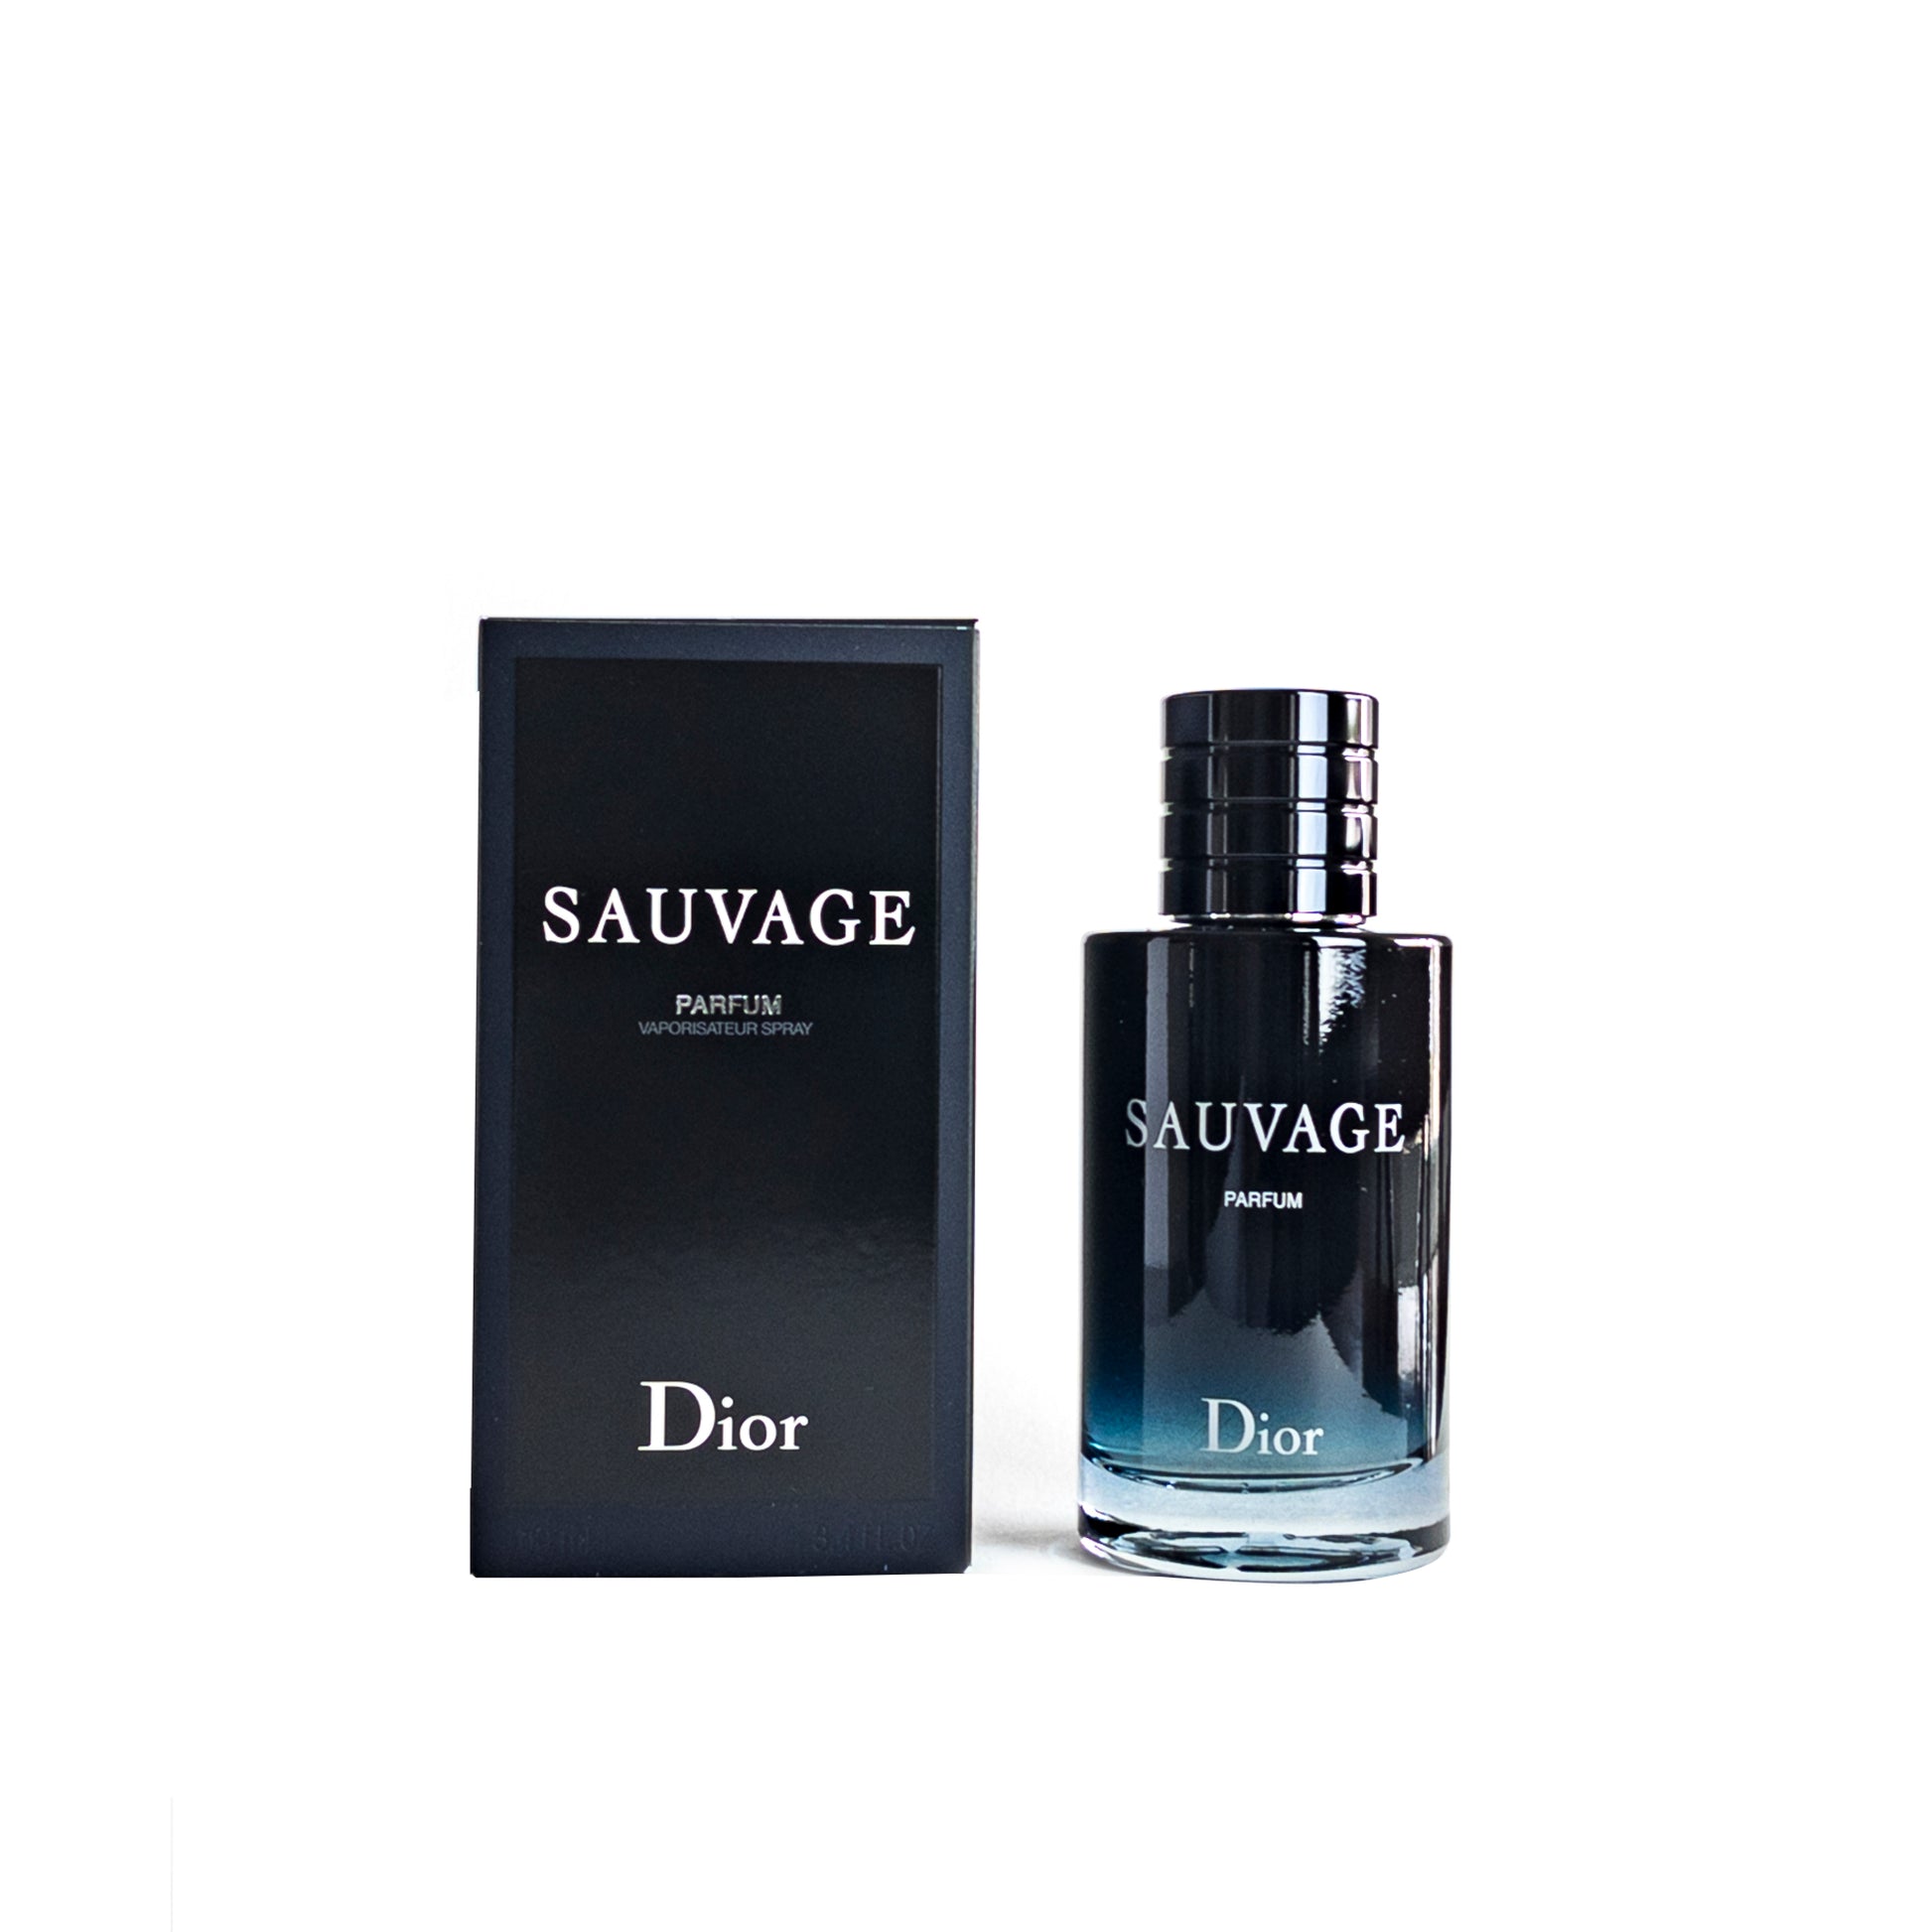 Sauvage for Men by Christian Dior Parfum Spray 3.4 oz. Click to open in modal